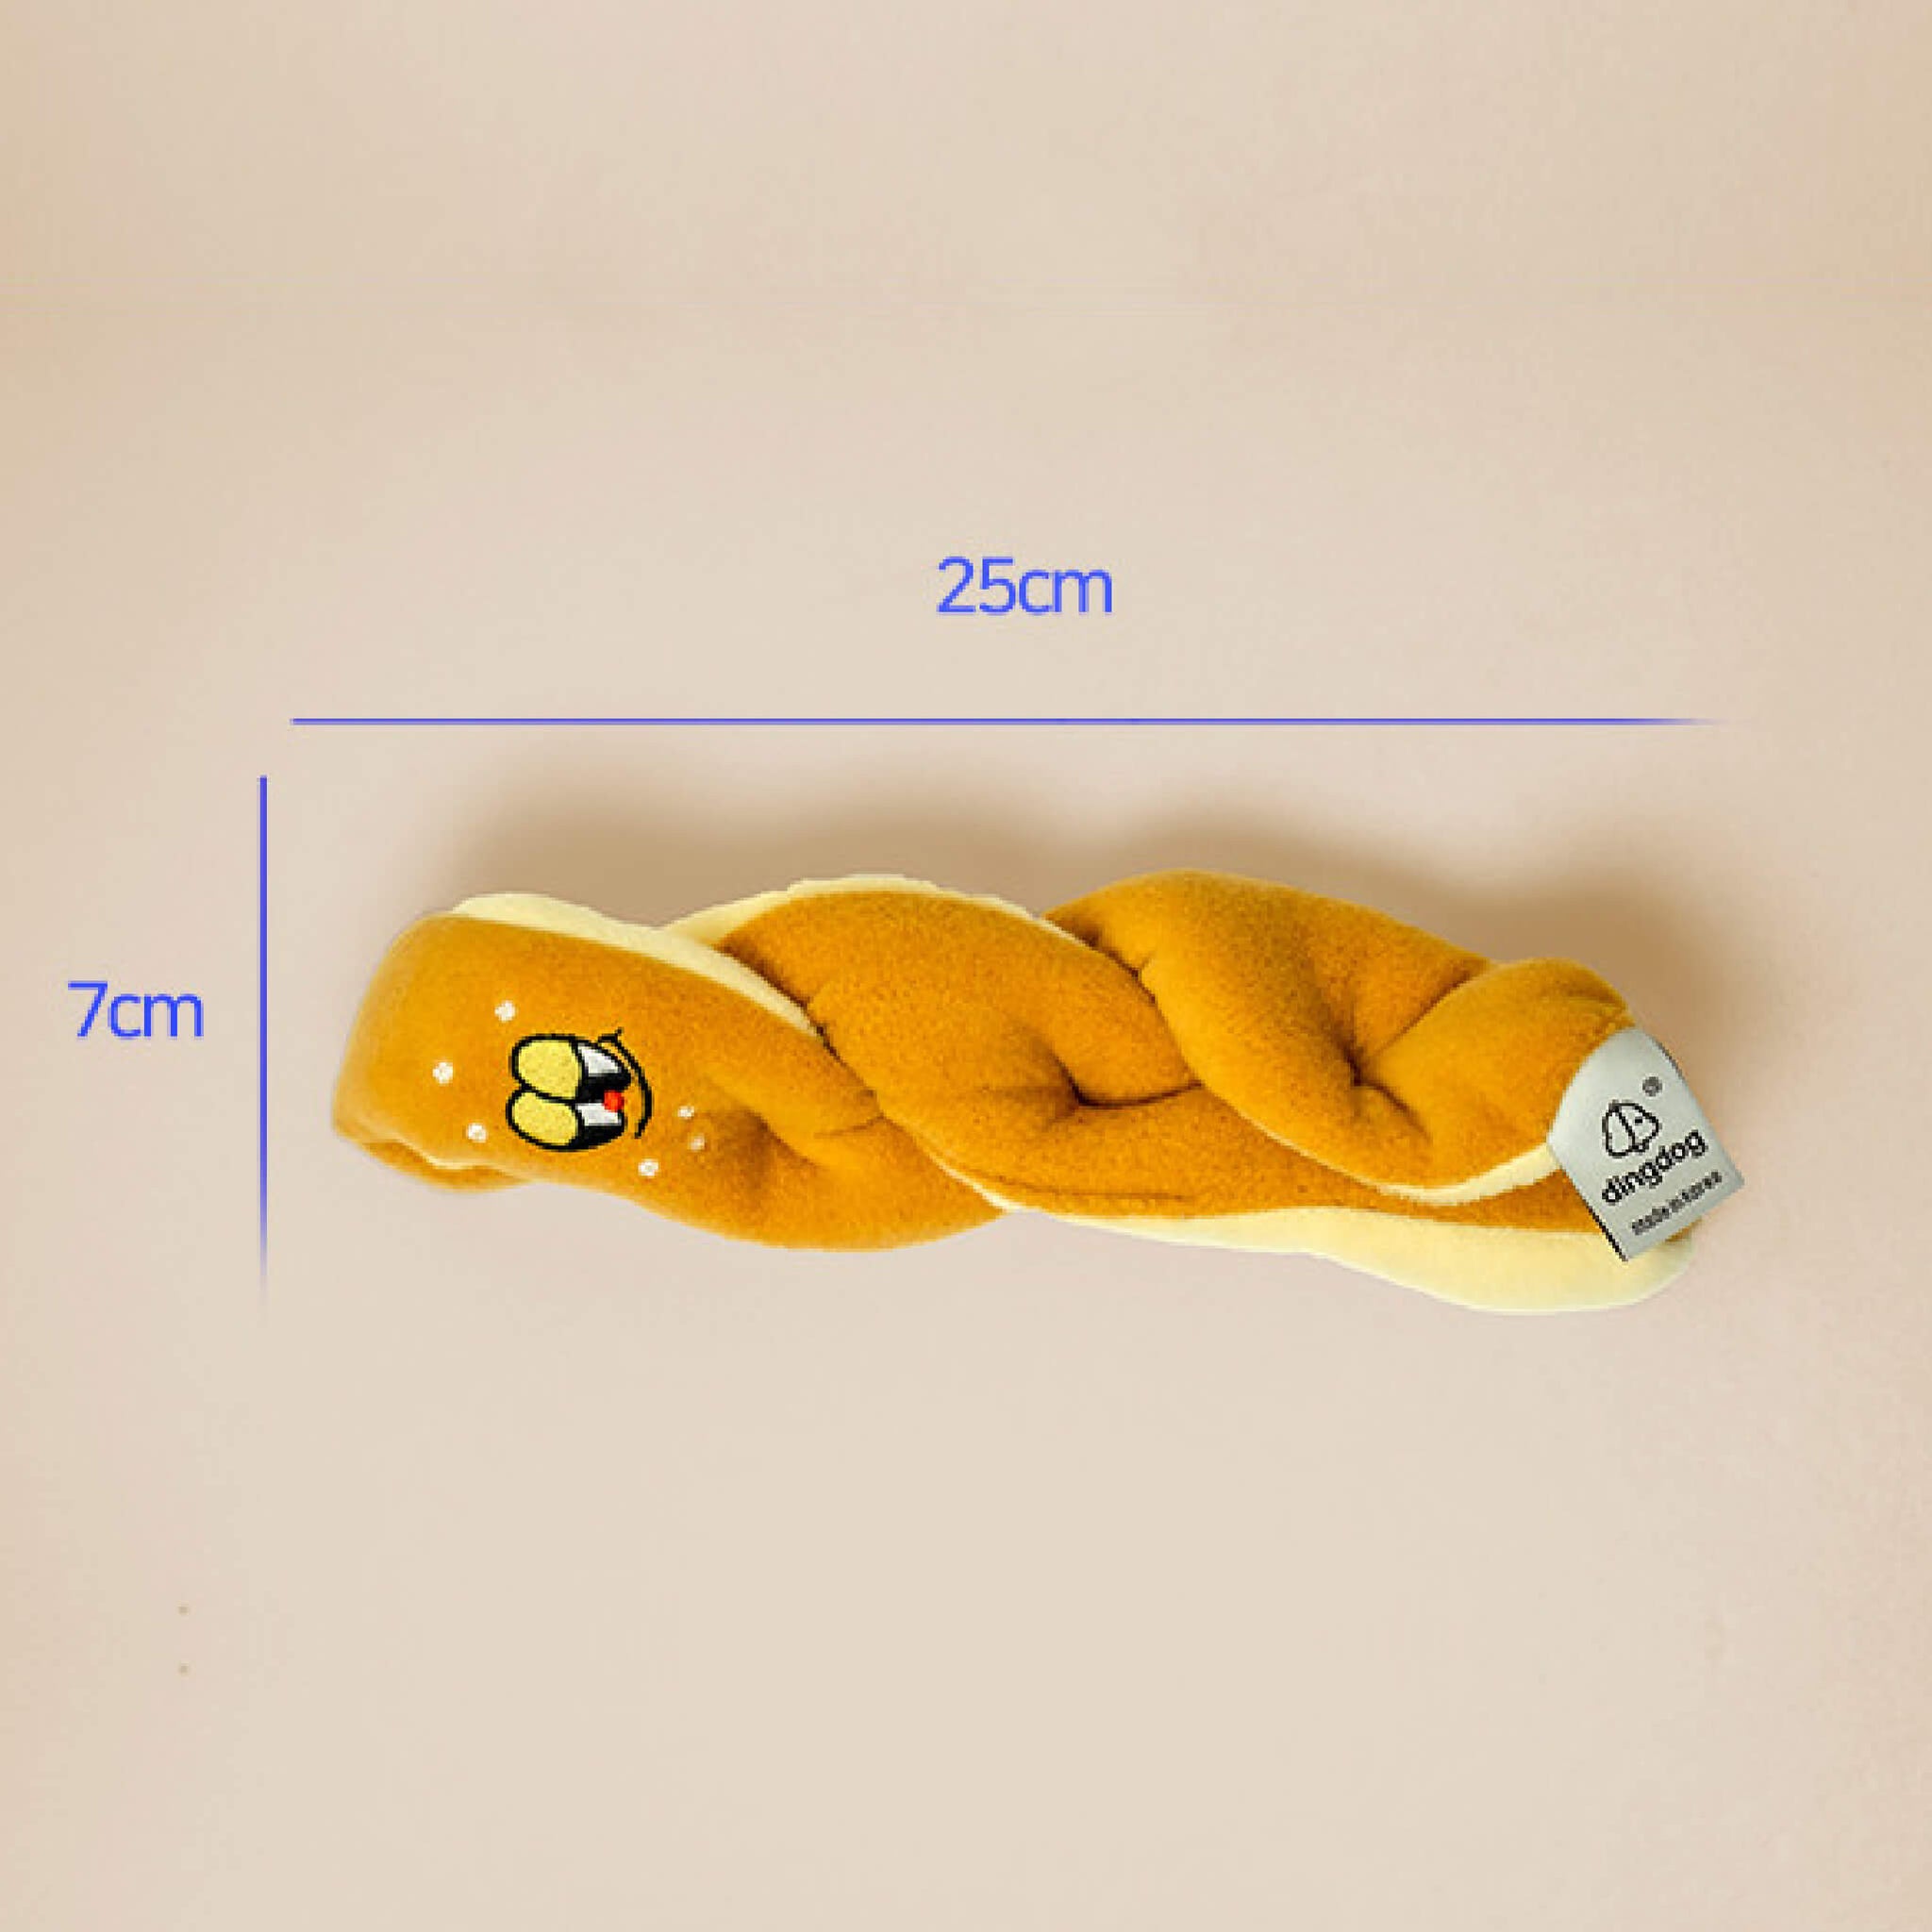 Dimensions for twisted bread nosework toy.